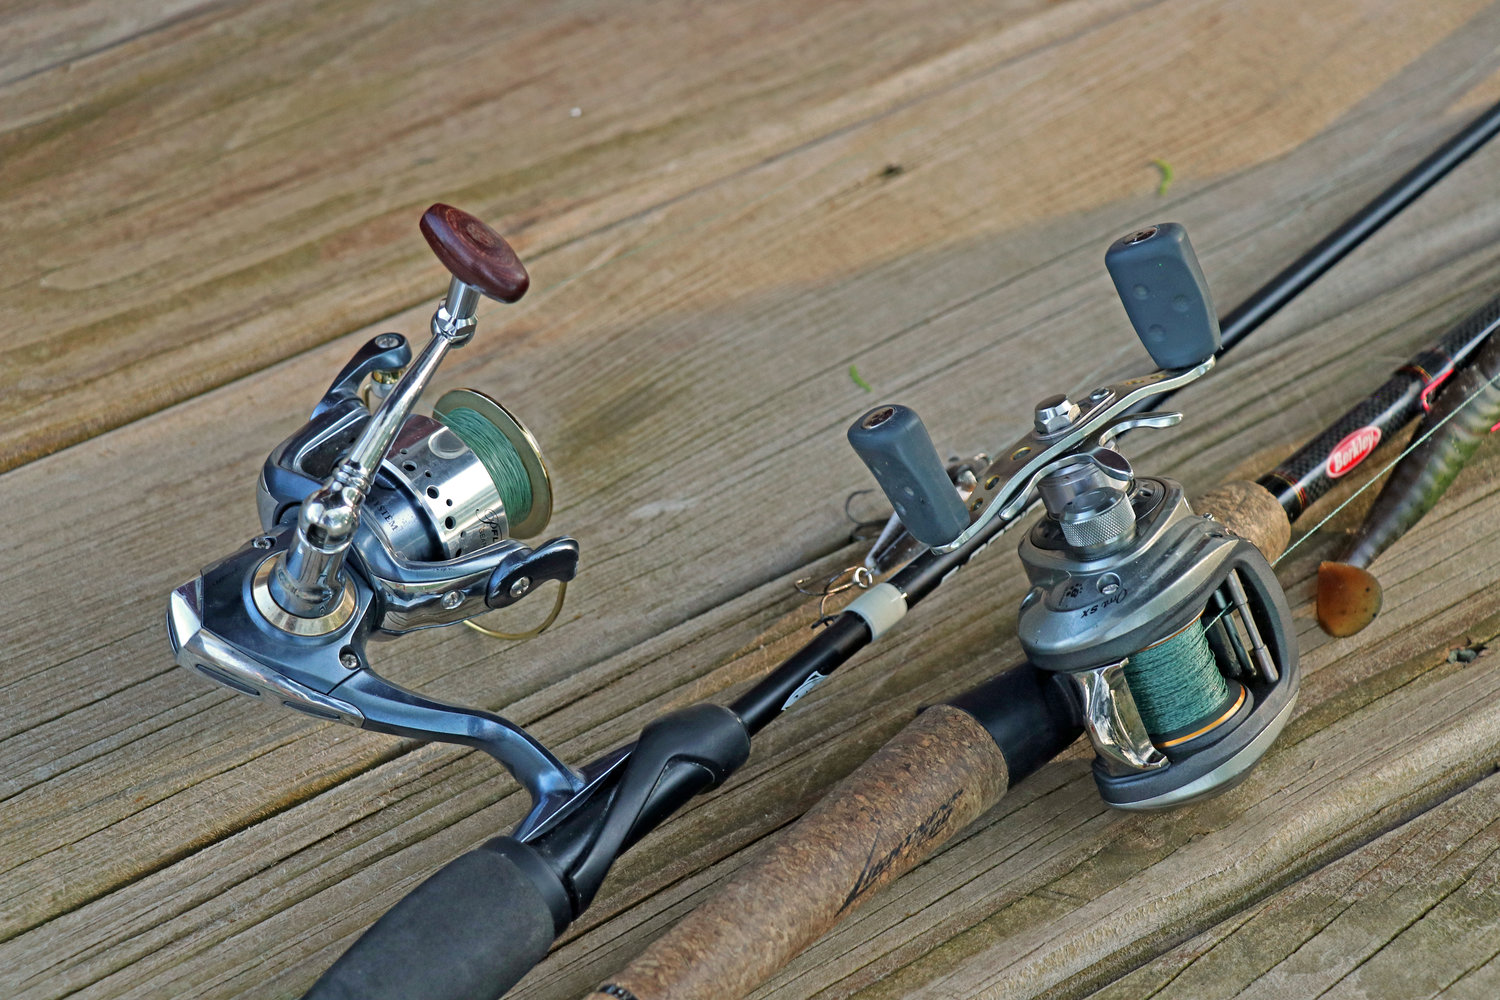 Where did all the fishing equipment go? - Fishing Rods, Reels